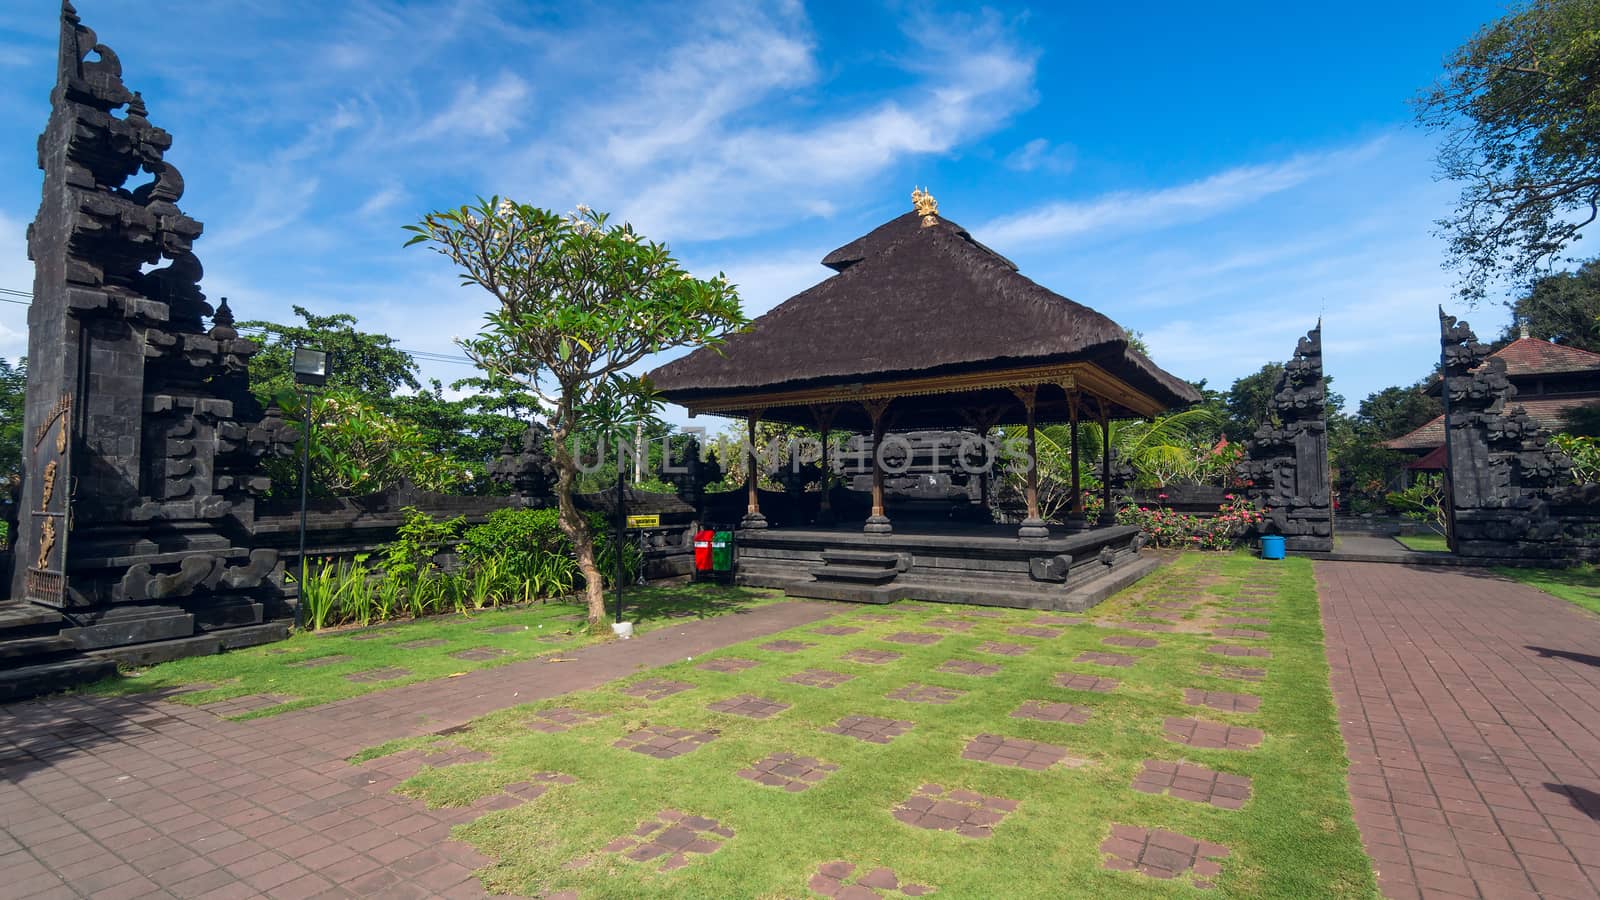 Famouse old temple on island Bali in Indonesia. Summer sunny day.